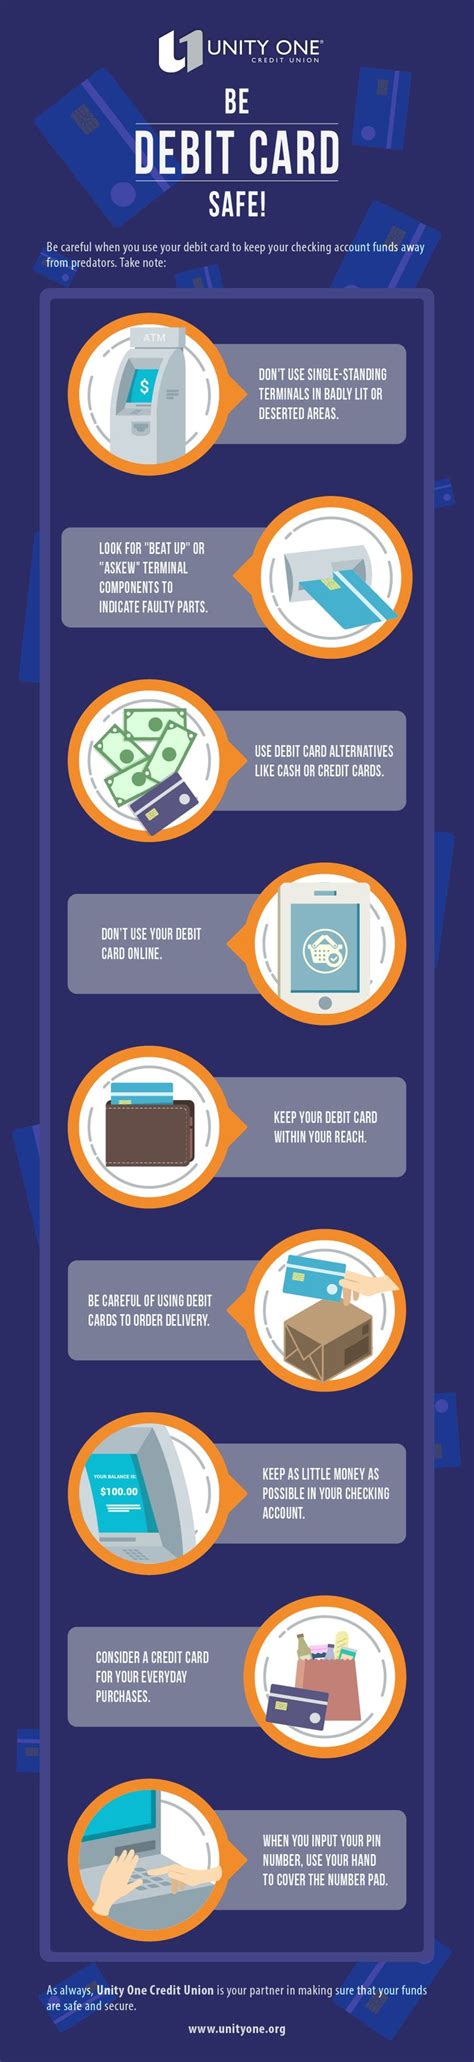 How To Be Debit Card Safe Infographic Cards Debit Card Finance